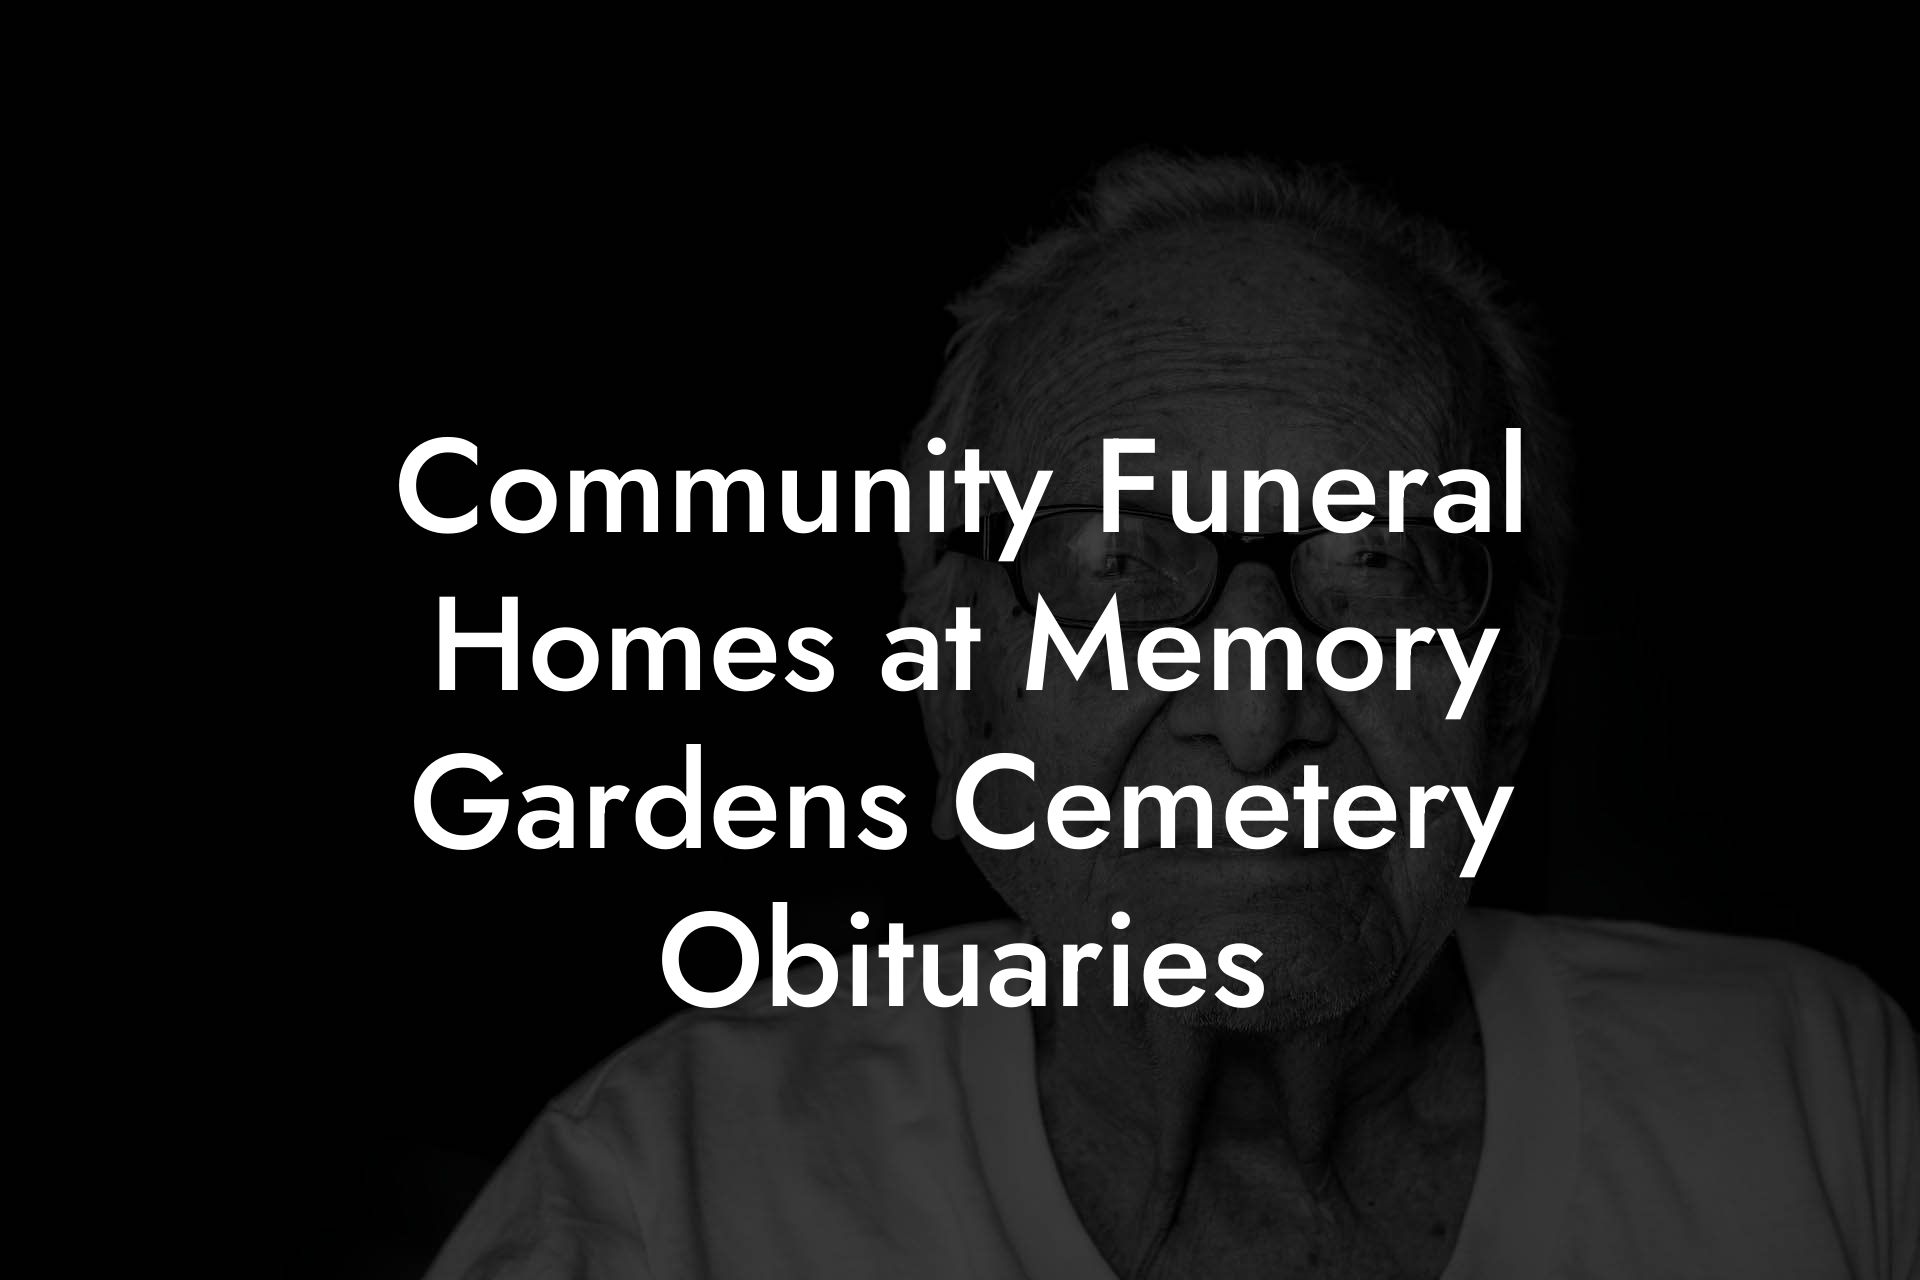 Community Funeral Homes at Memory Gardens Cemetery Obituaries